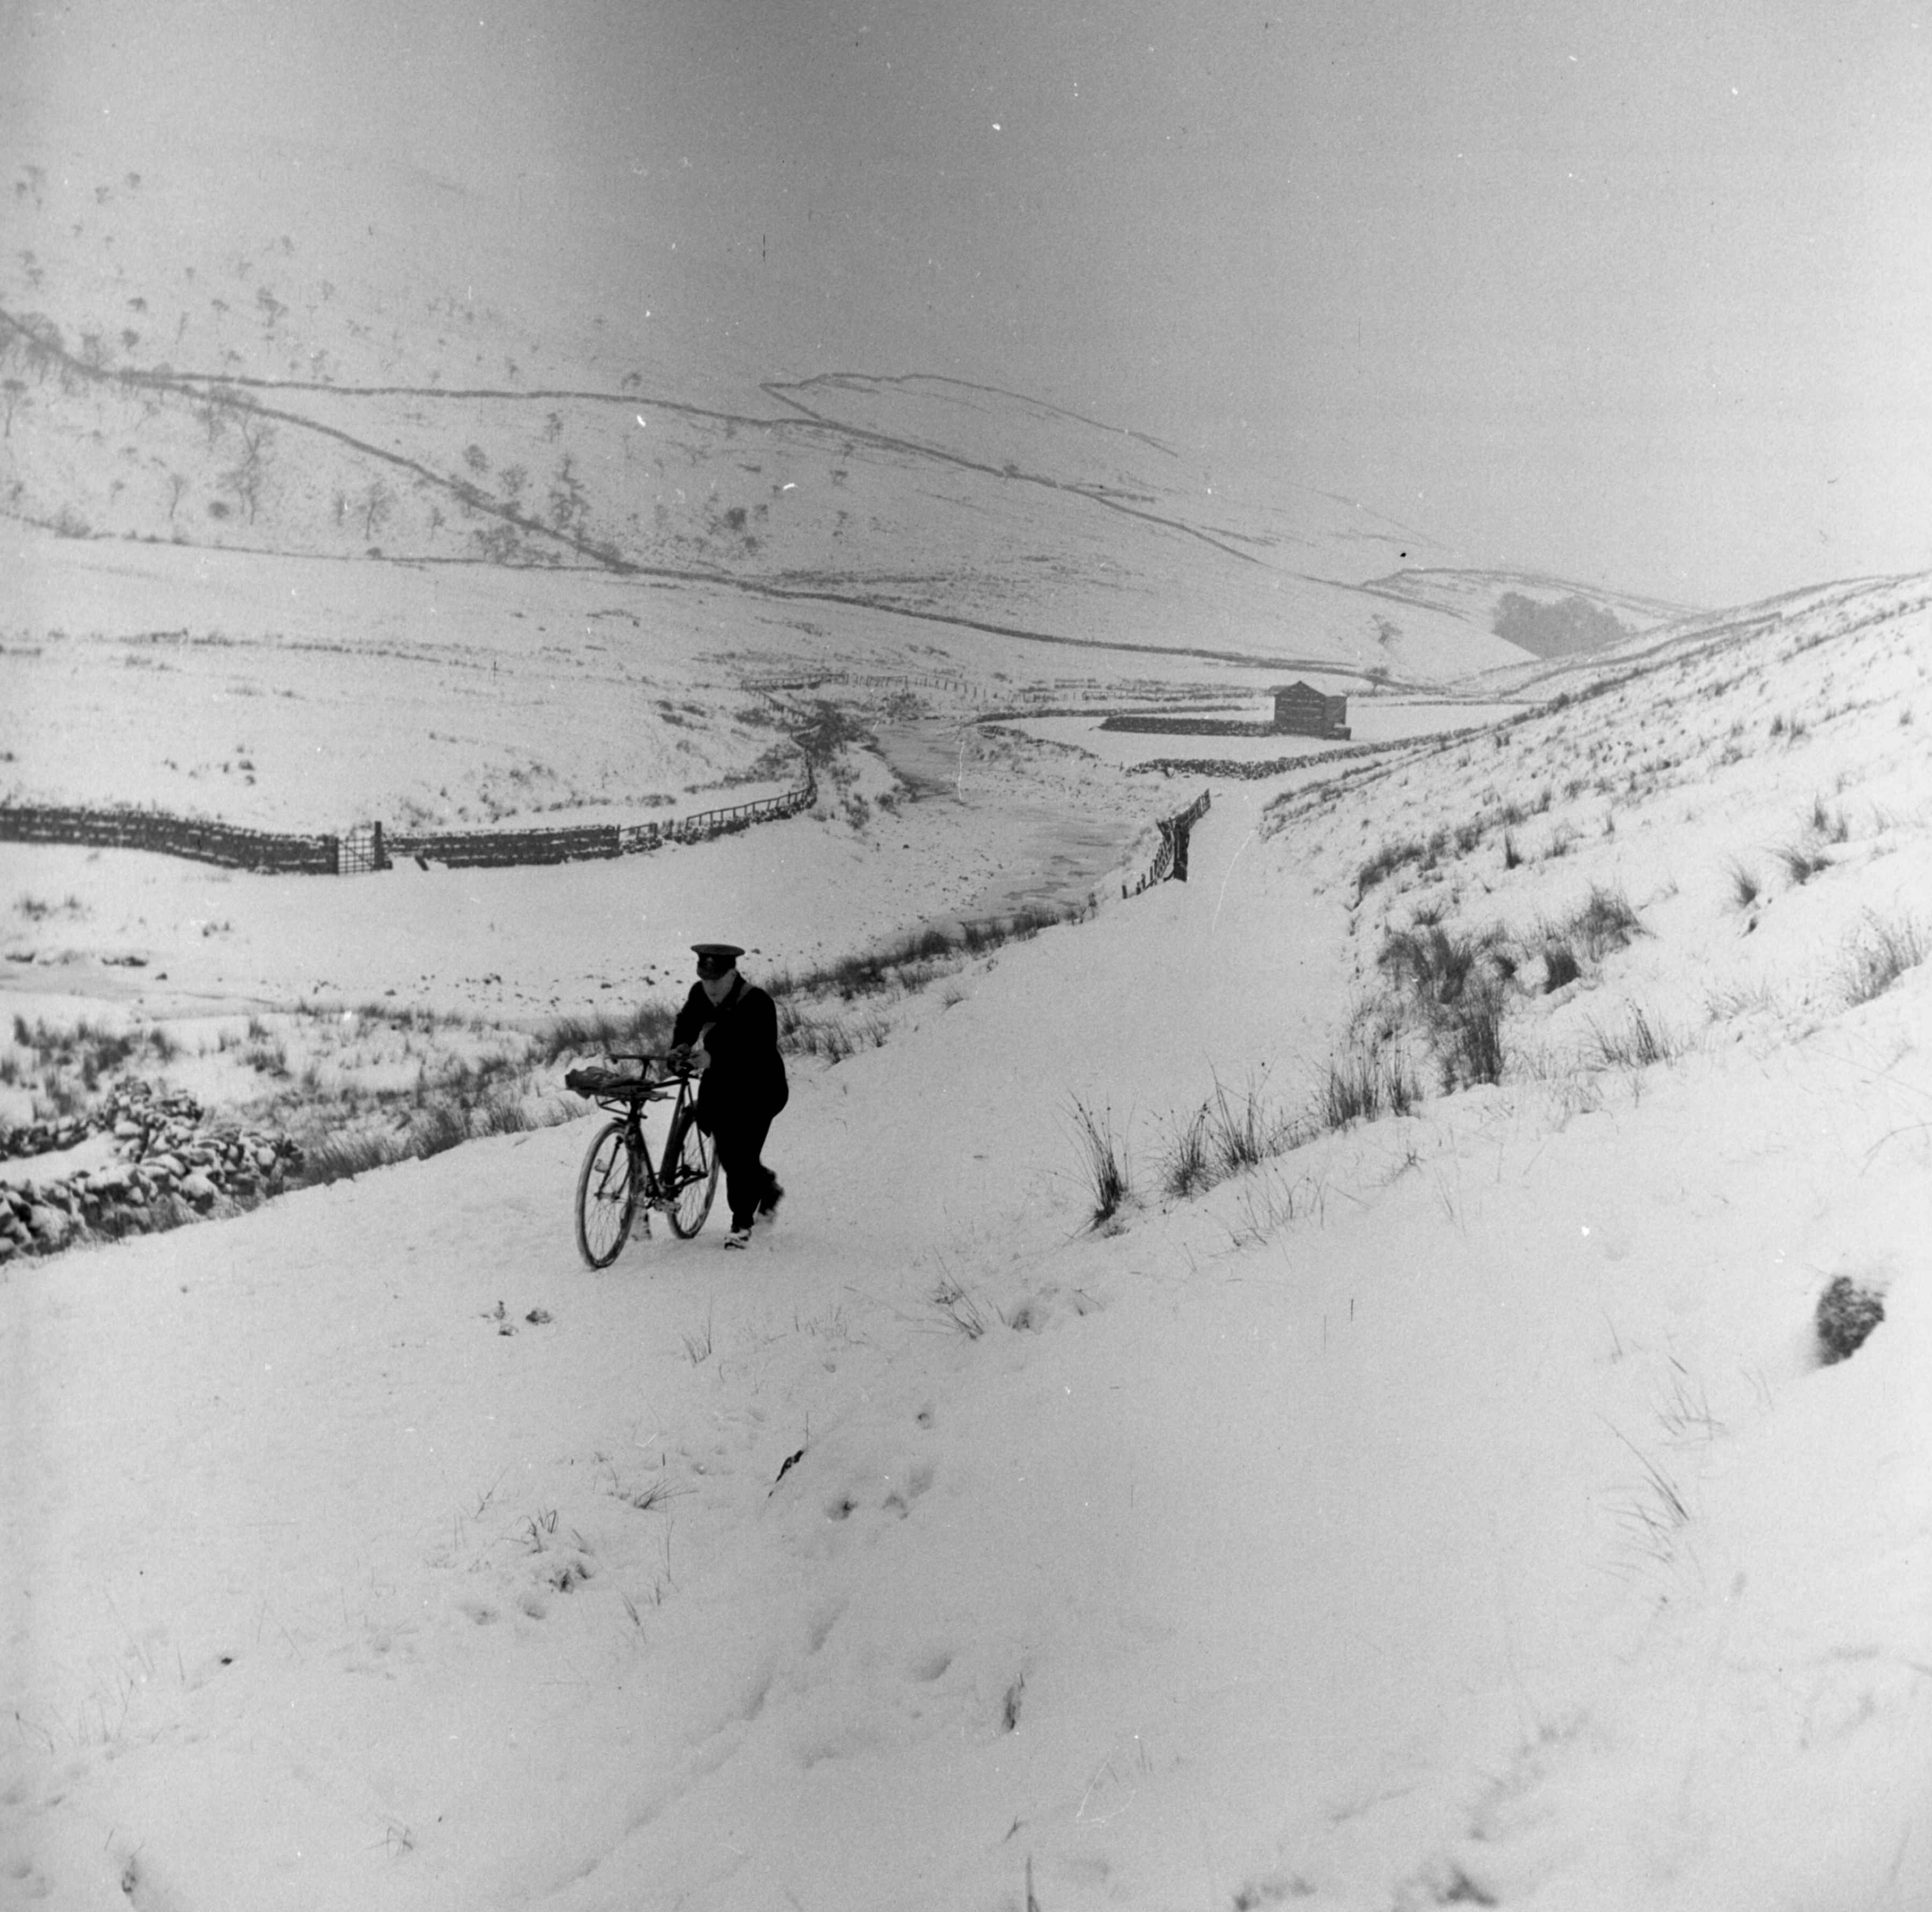 A Hawes district postman on his rounds, Cotterdale.